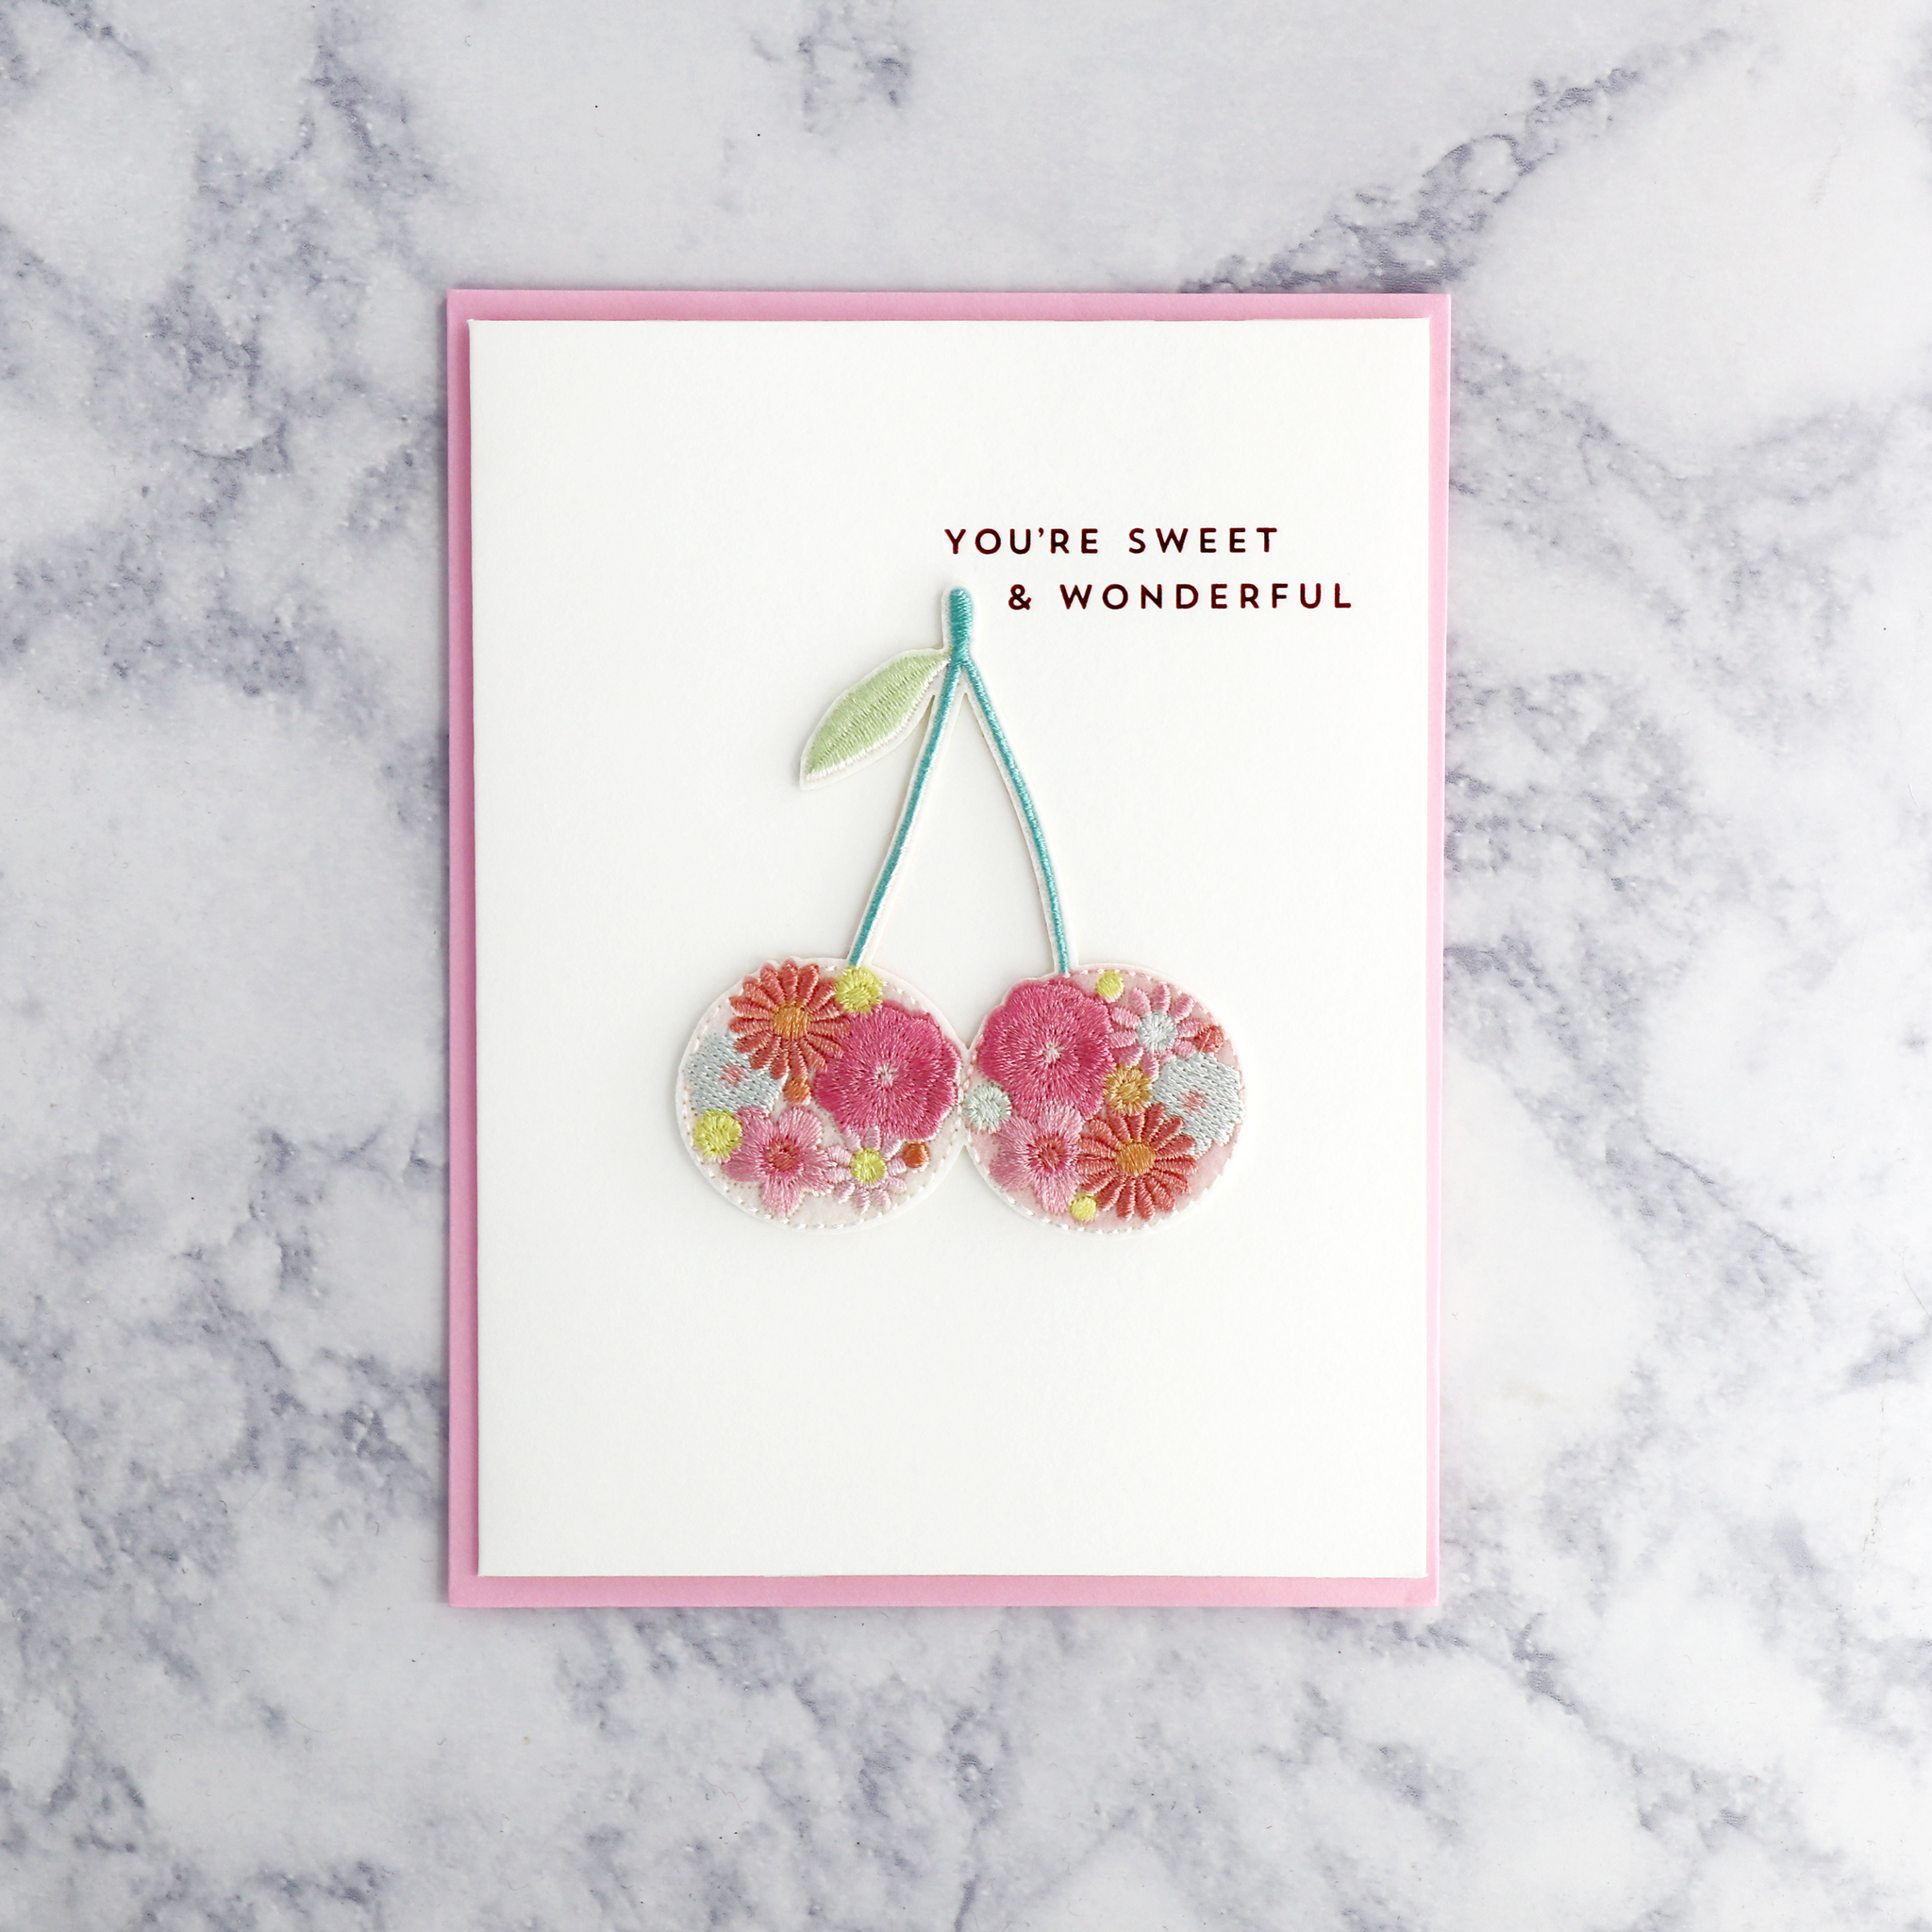 Embroidered Cherries Birthday Card